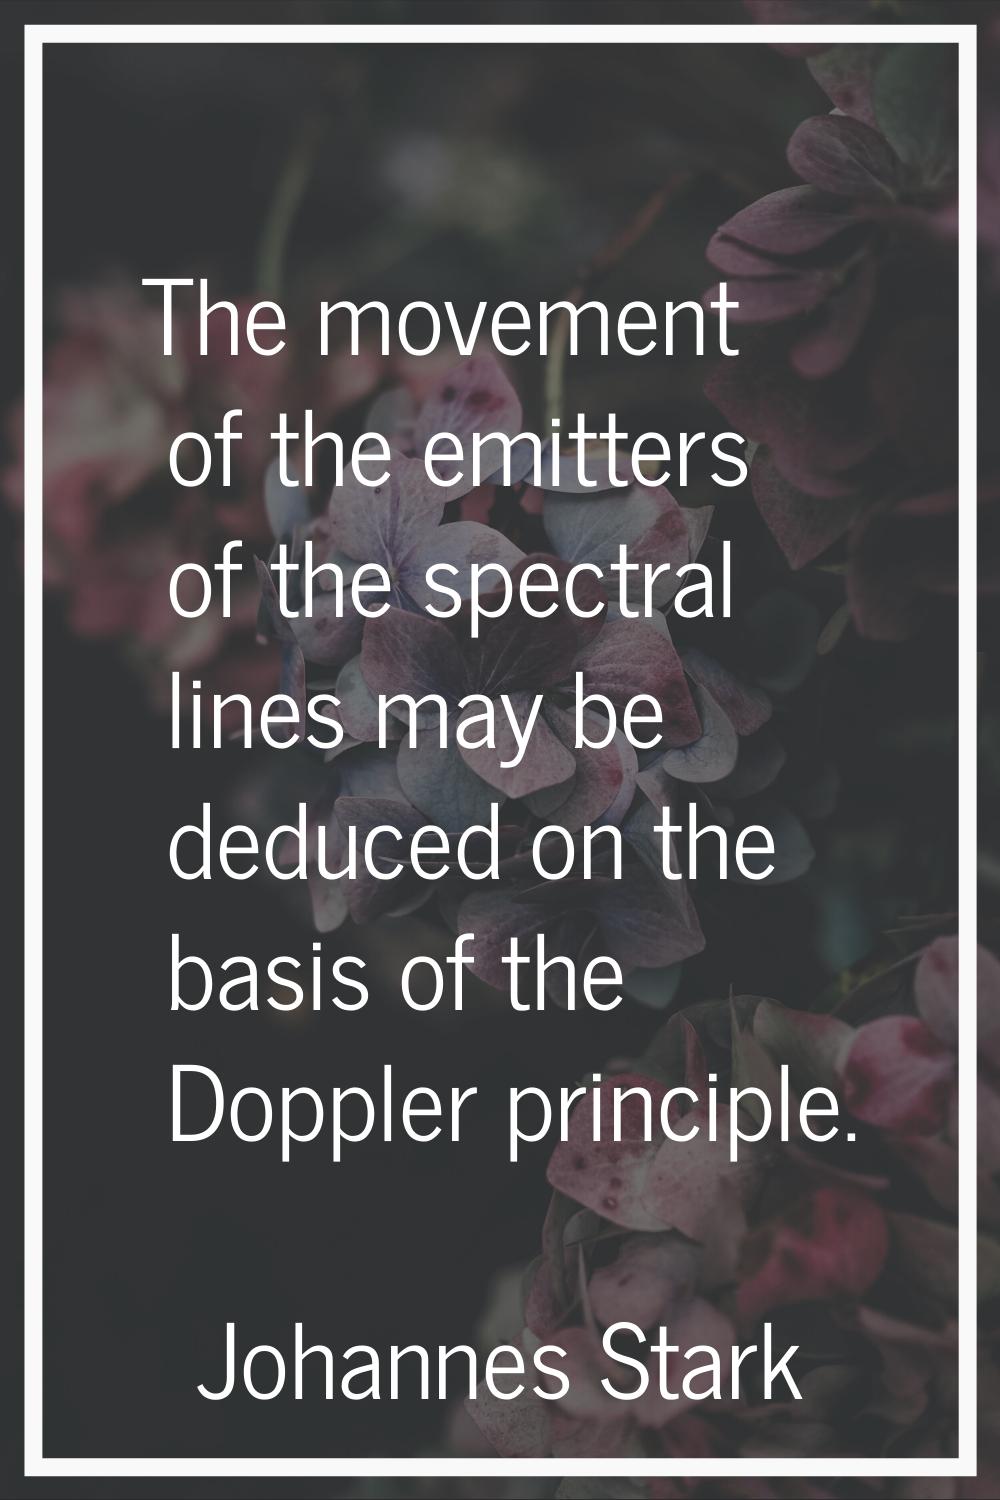 The movement of the emitters of the spectral lines may be deduced on the basis of the Doppler princ